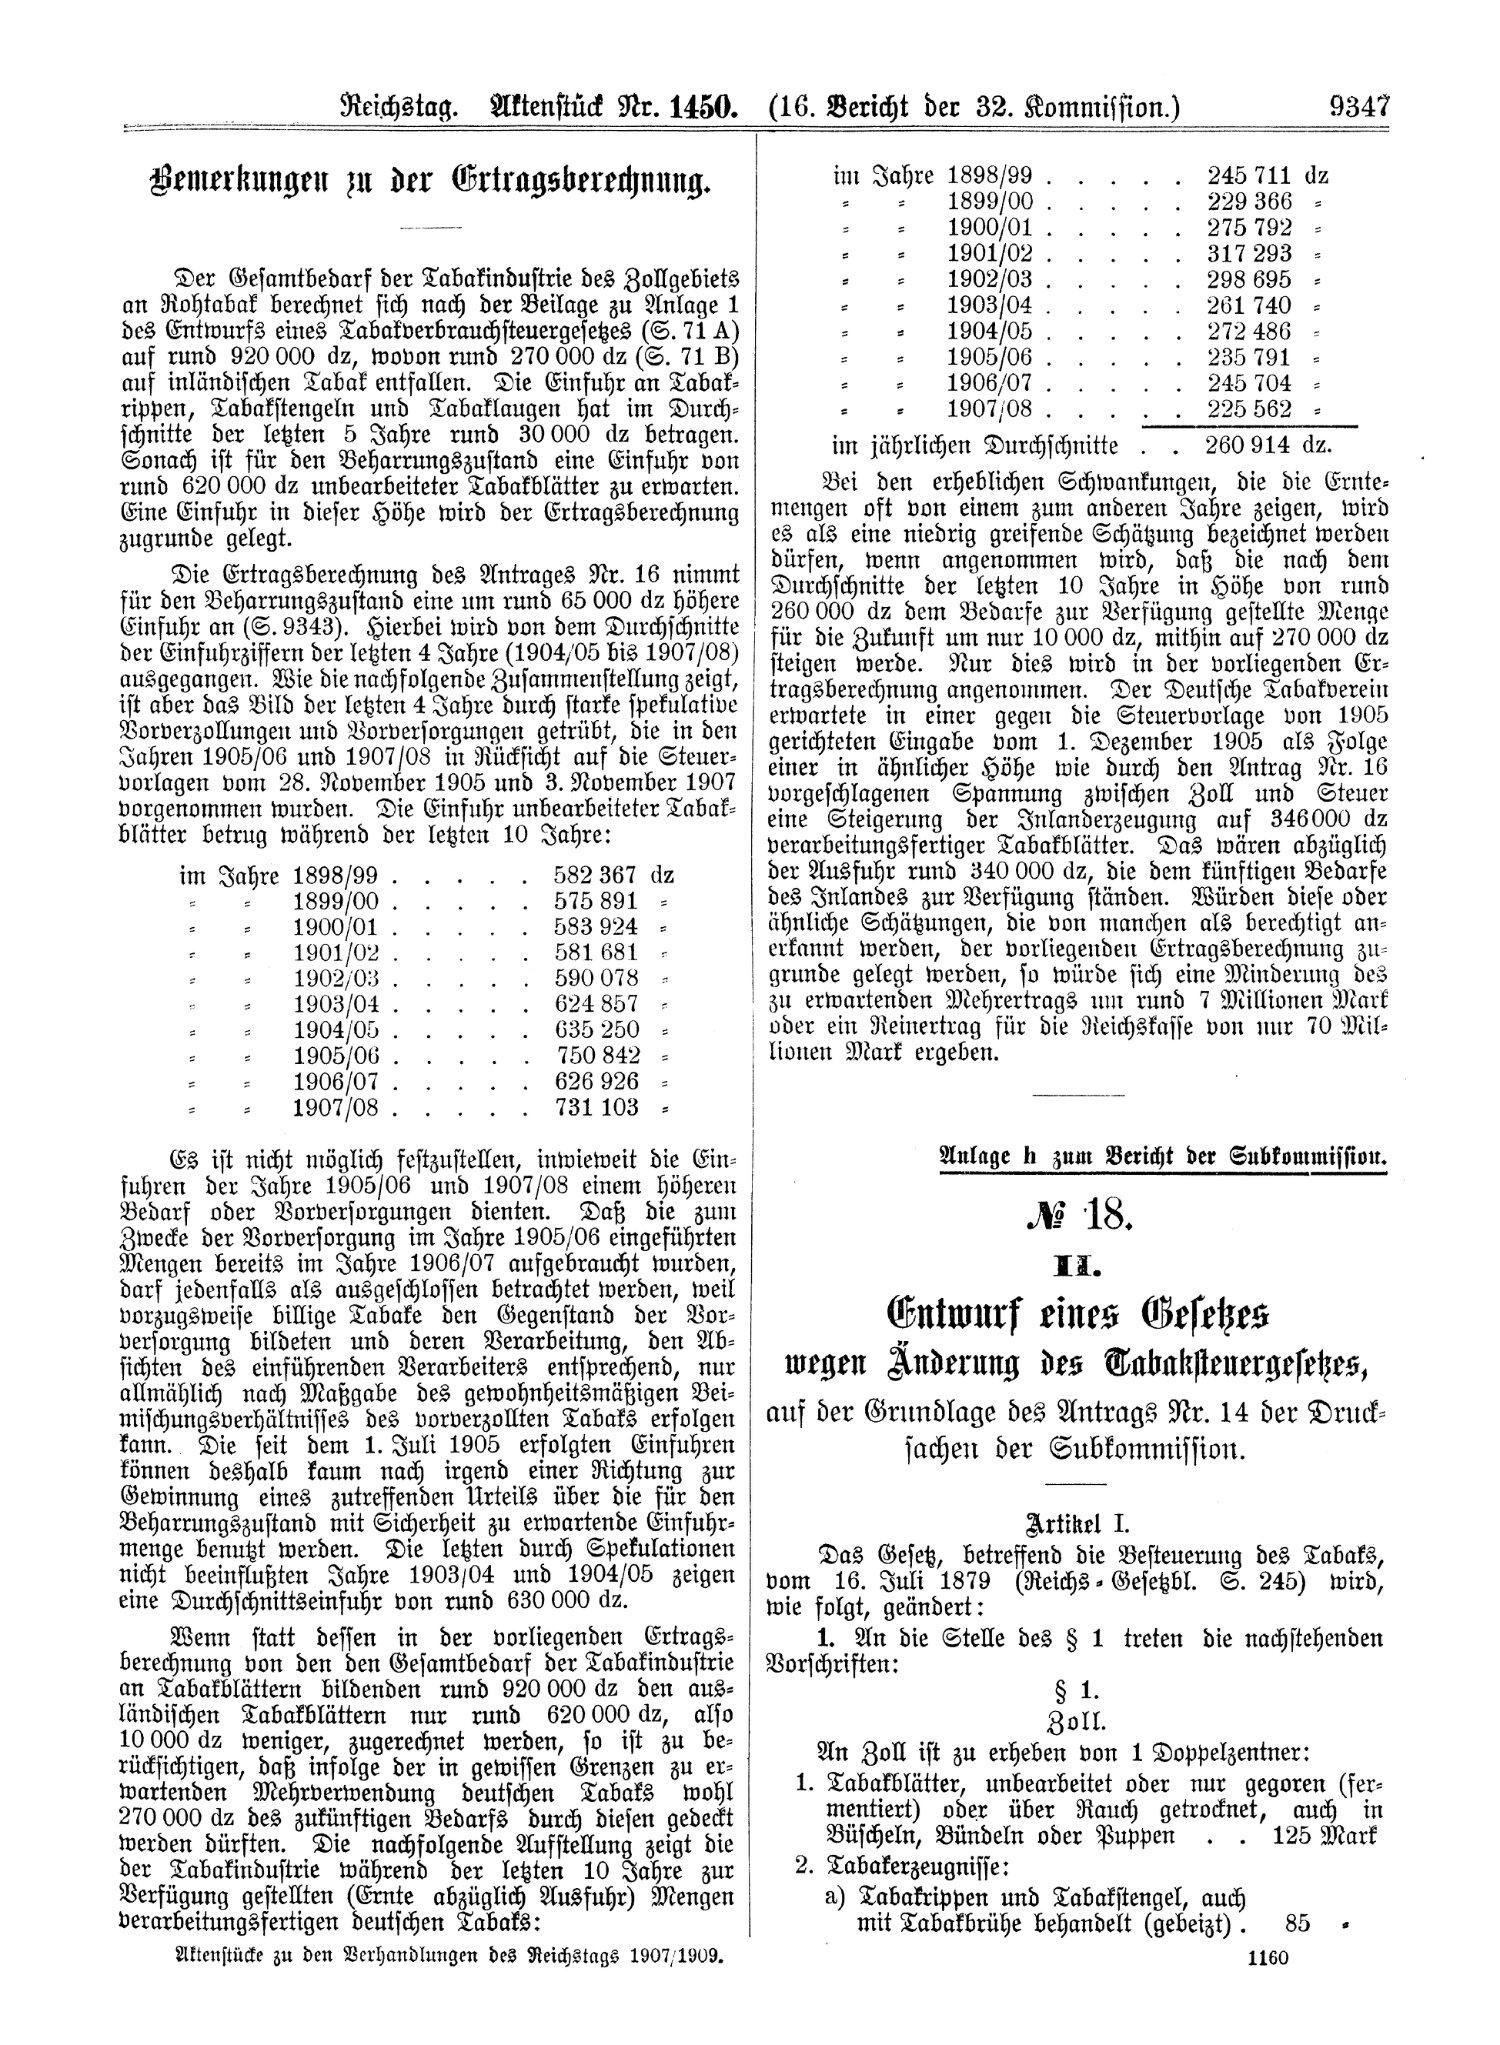 Scan of page 9347